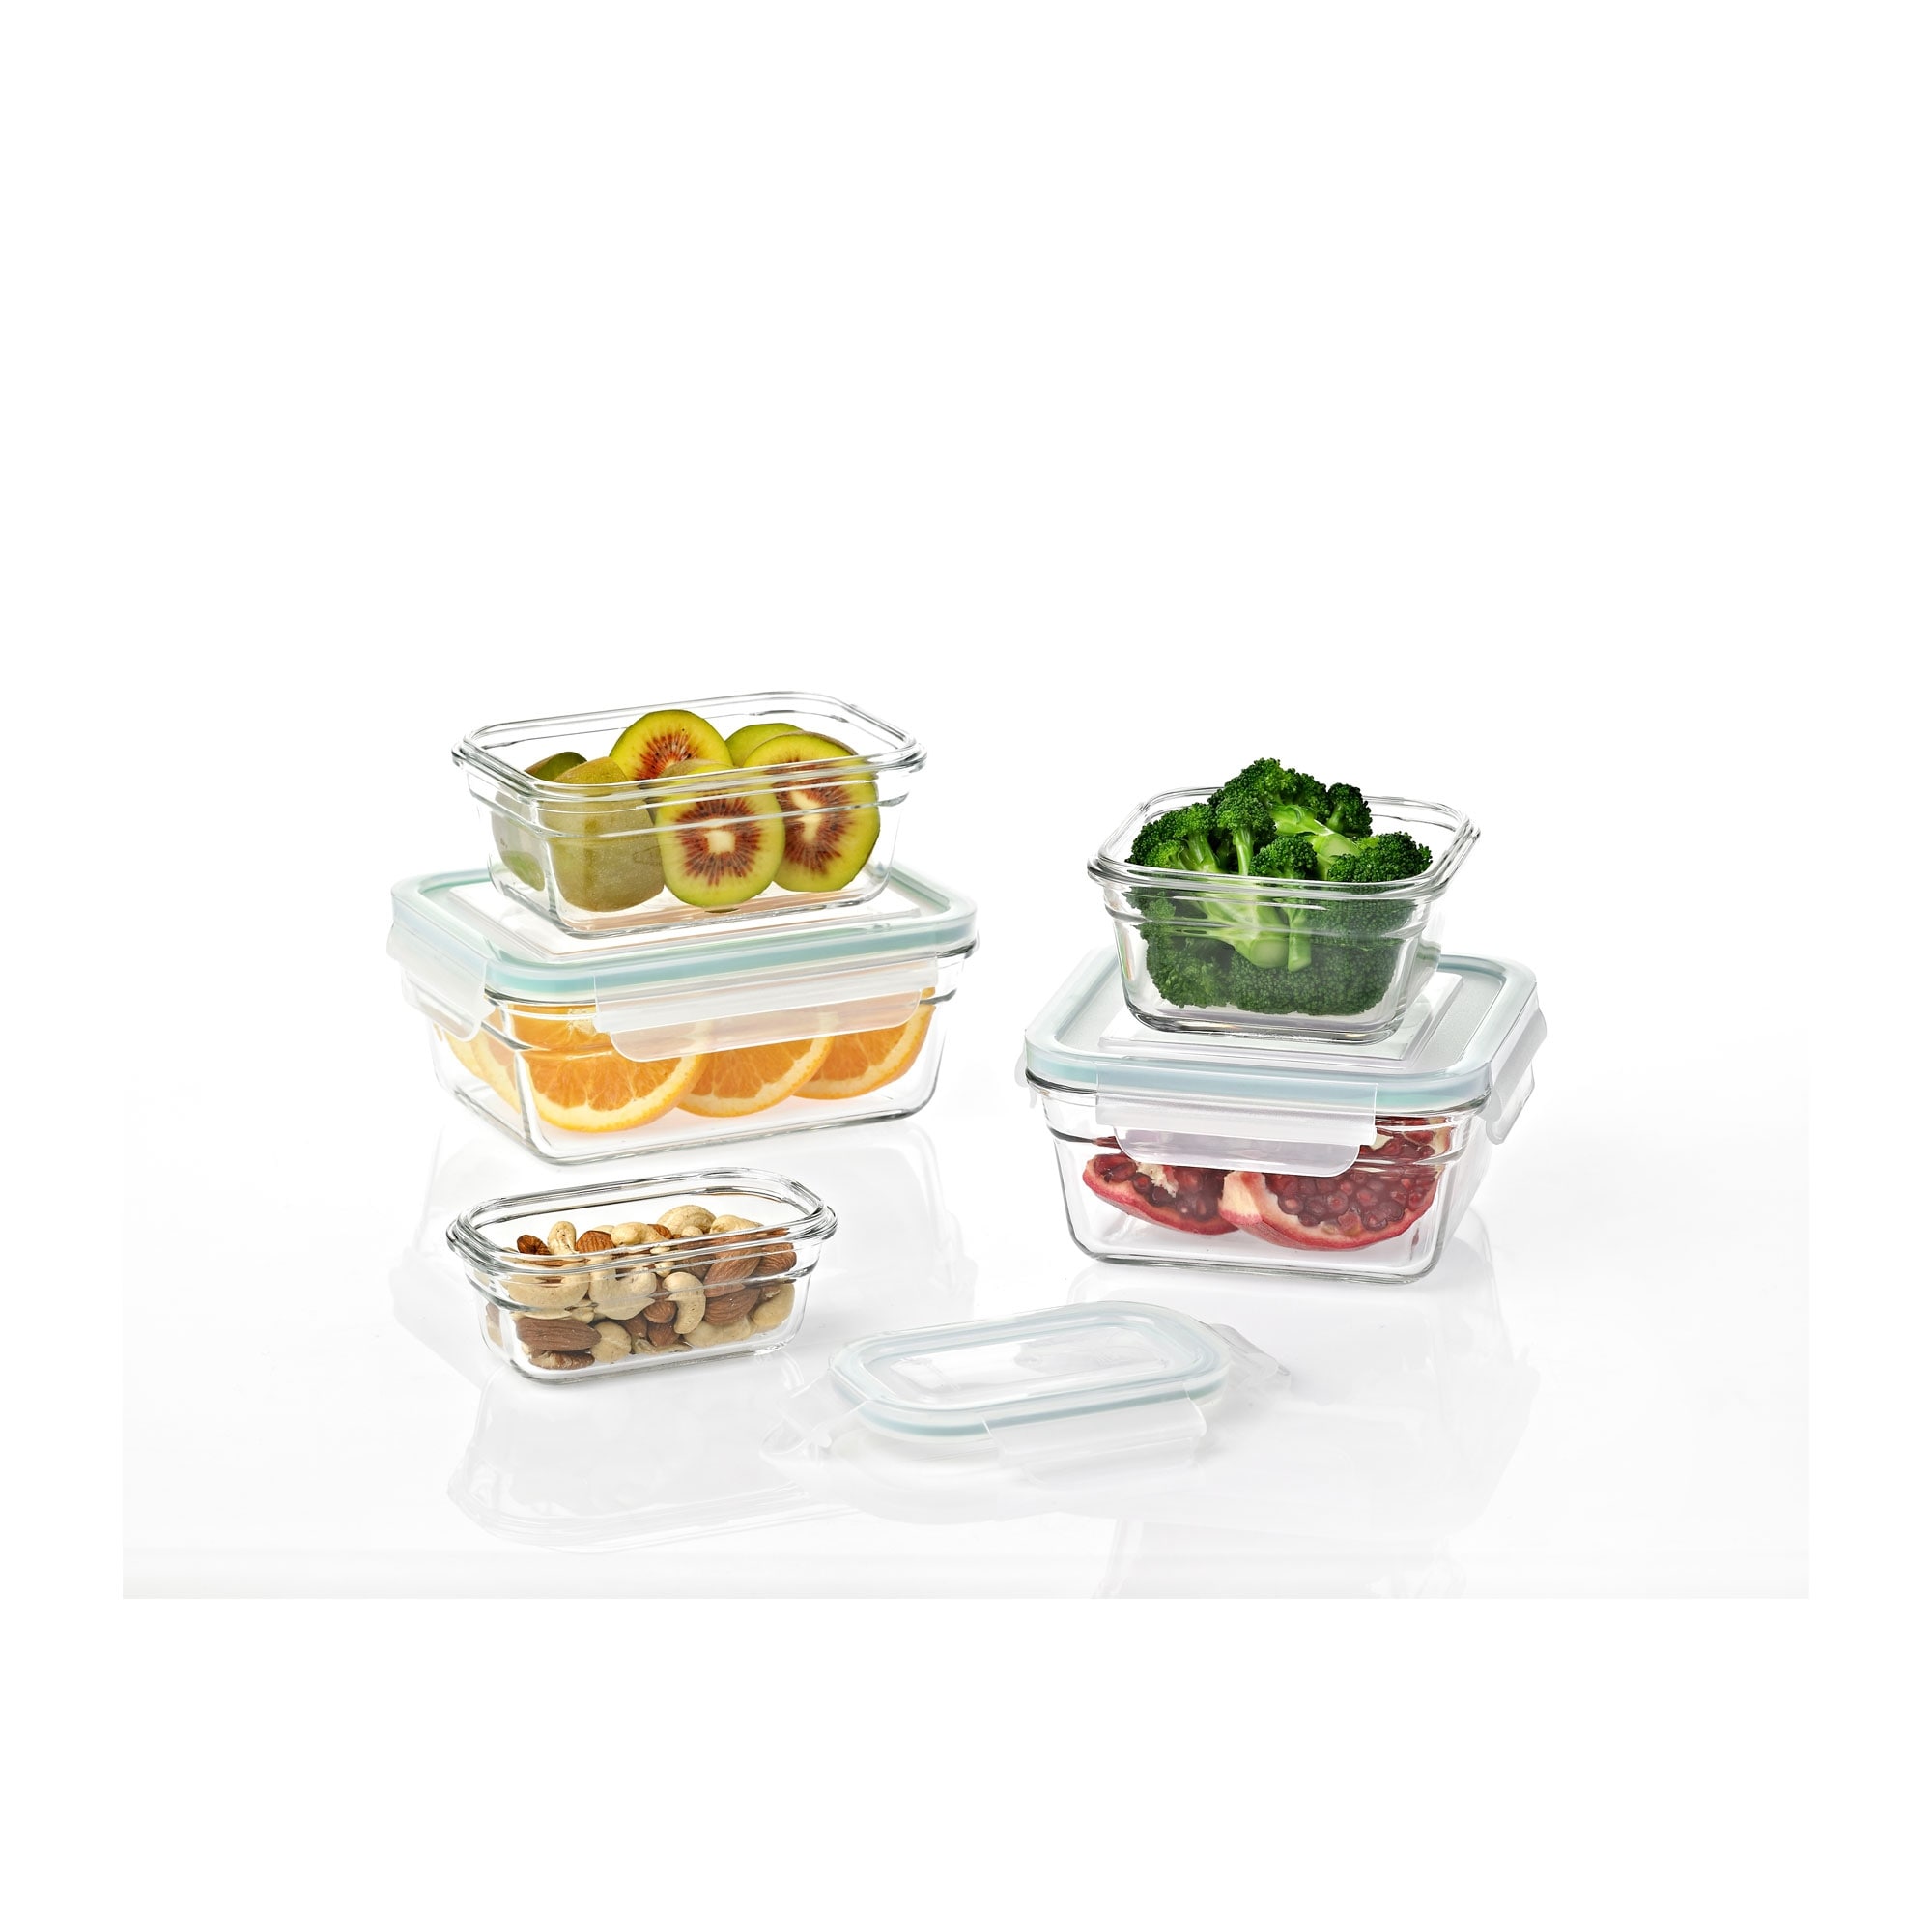 https://ak1.ostkcdn.com/images/products/is/images/direct/0cb75b9018423defc48e431ee81171b9e6ae291c/Glasslock-Oven-and-Microwave-Safe-Glass-Food-Storage-Containers-10-Piece-Set.jpg